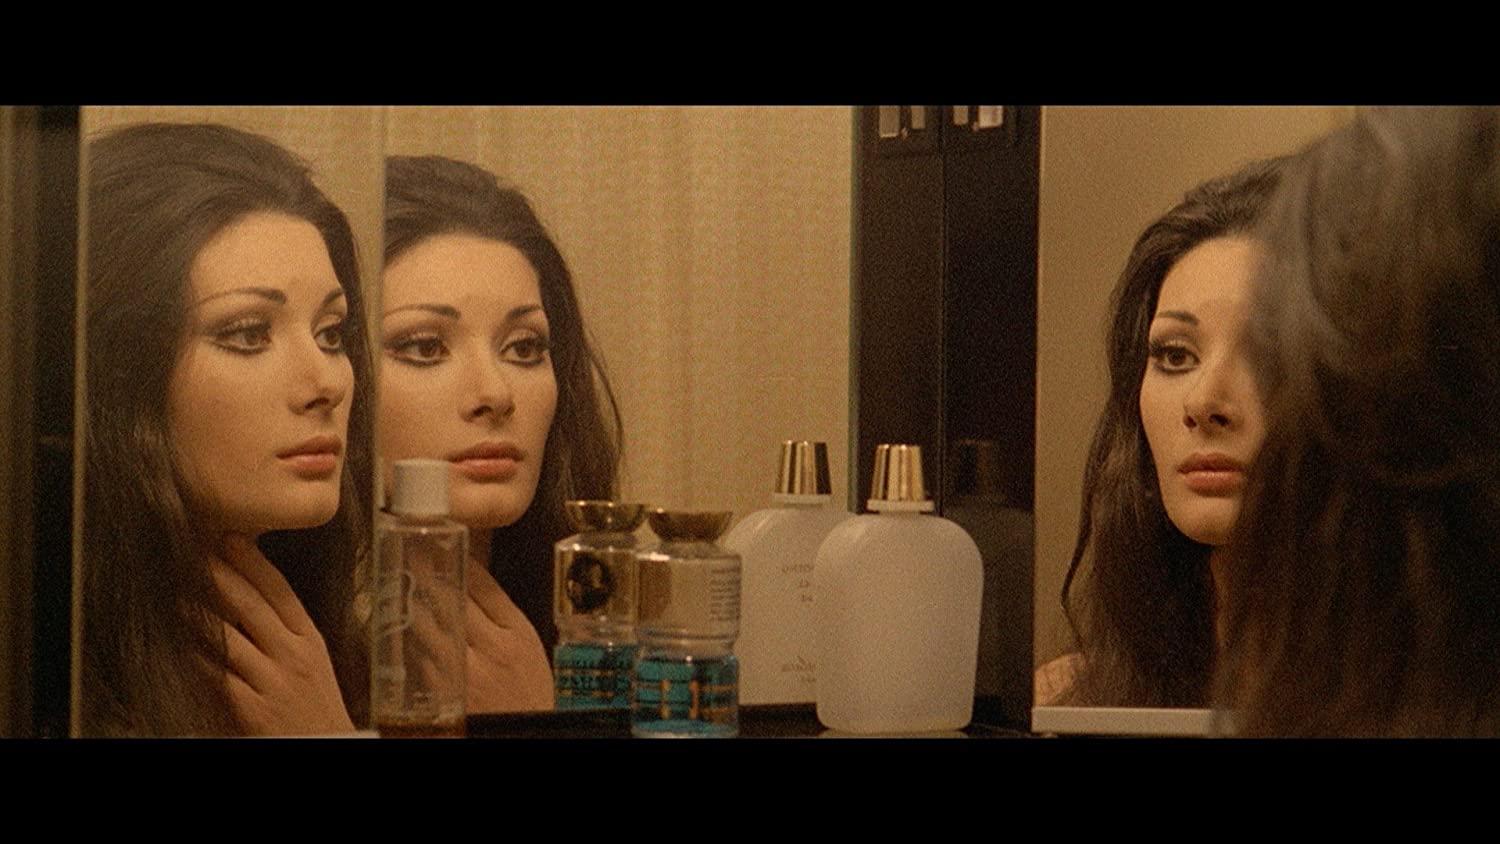 Edwige Fenech in All the Colors of the Dark